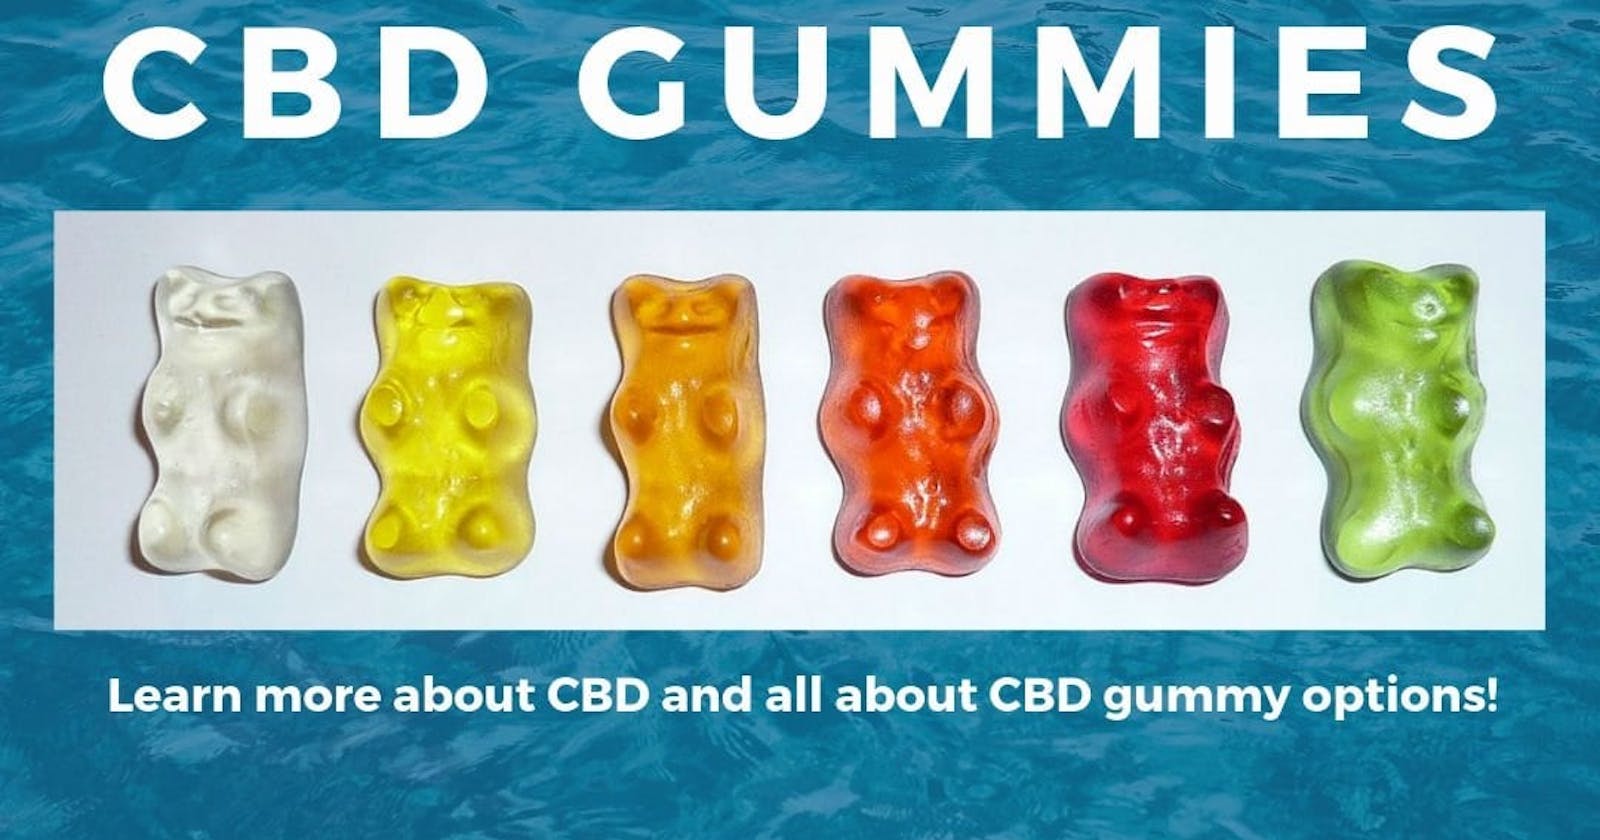 Starlight CBD Gummies Reviews [Episode Alert]- Price for Sale & Website Shocking Side Effects Revealed - Must See Is Trusted To Buying?